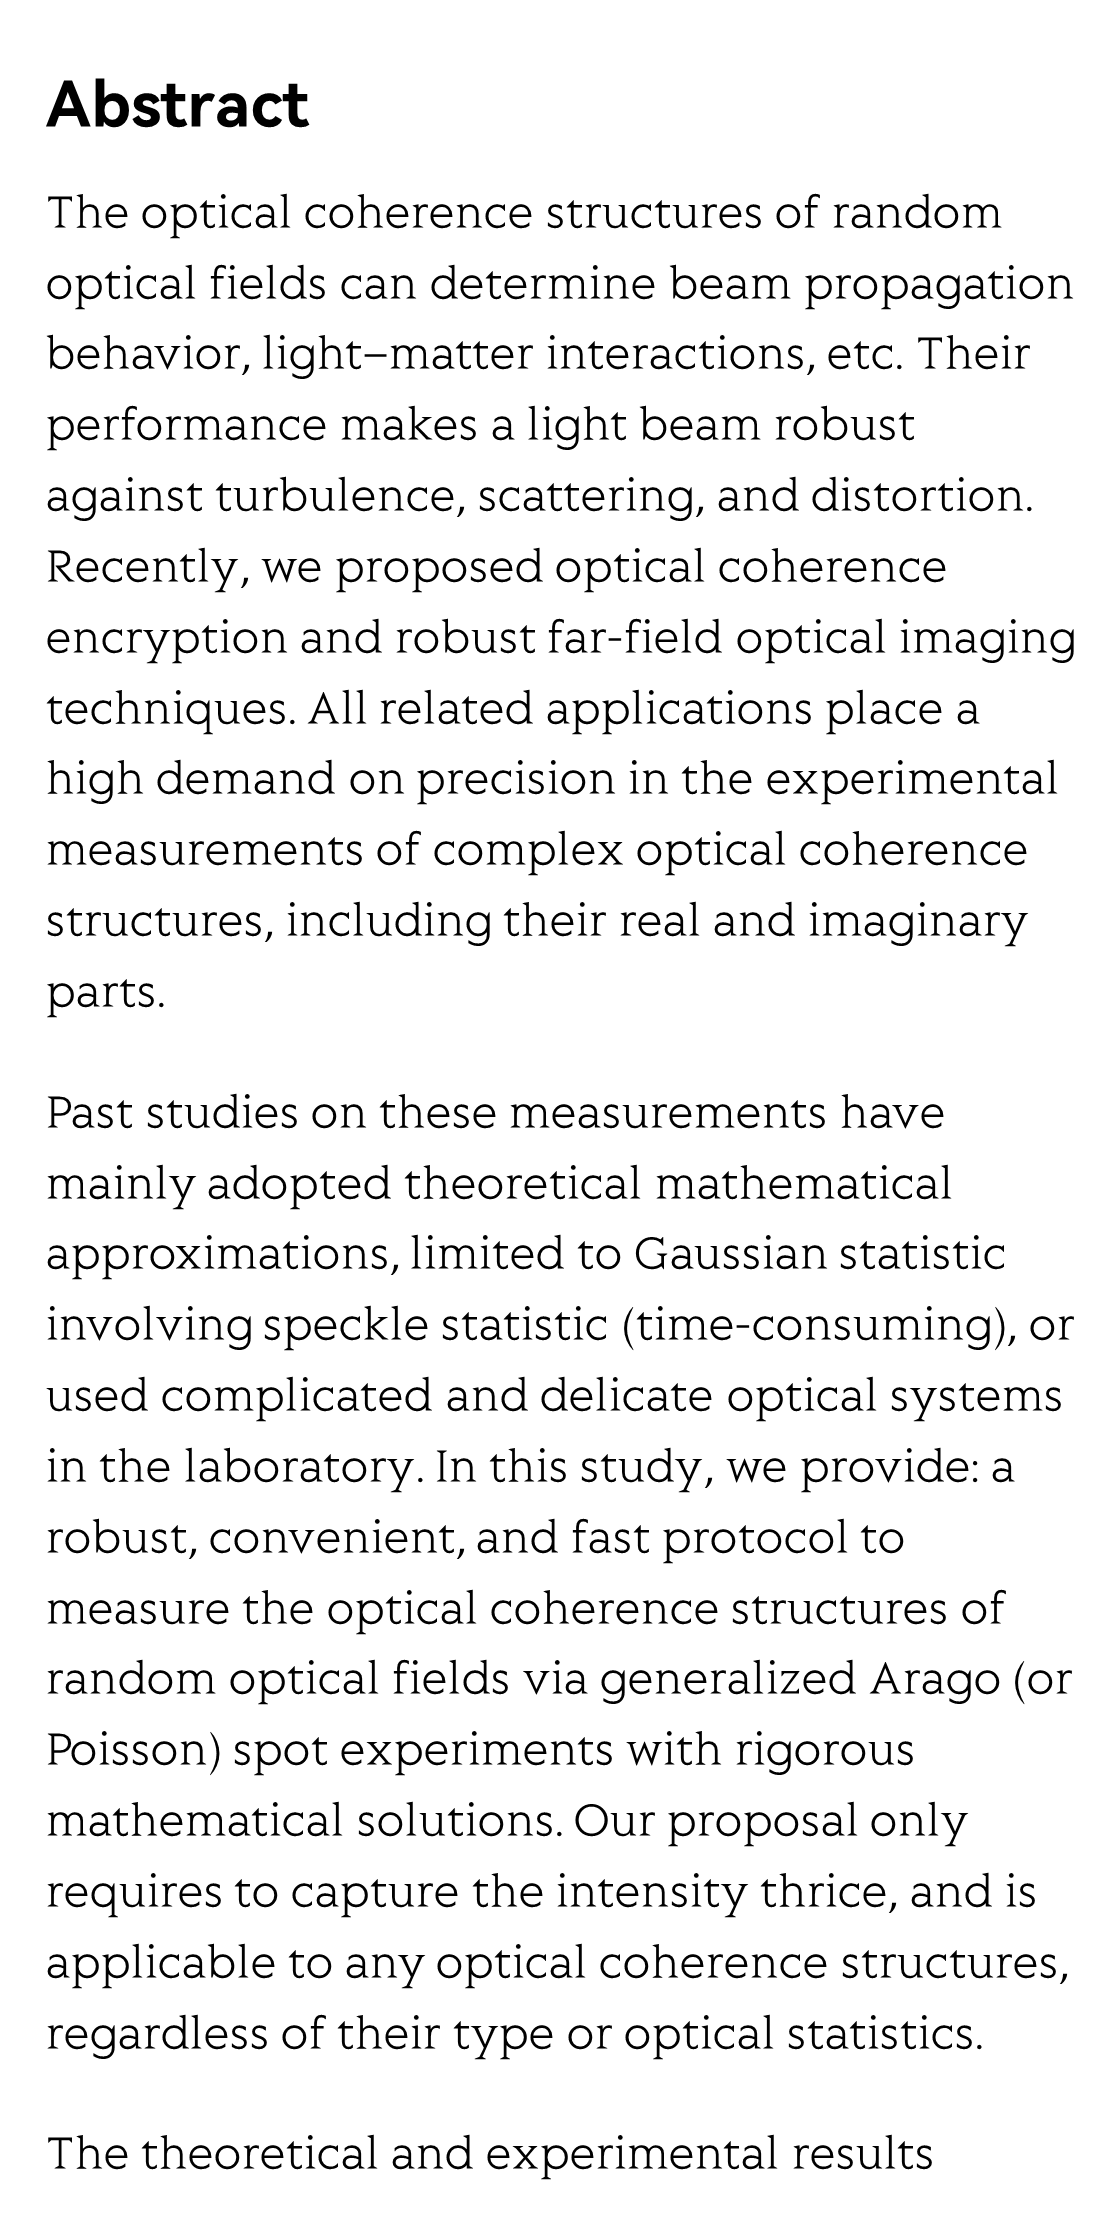 Measurement of optical coherence structures of random optical fields using generalized Arago spot experiment_2